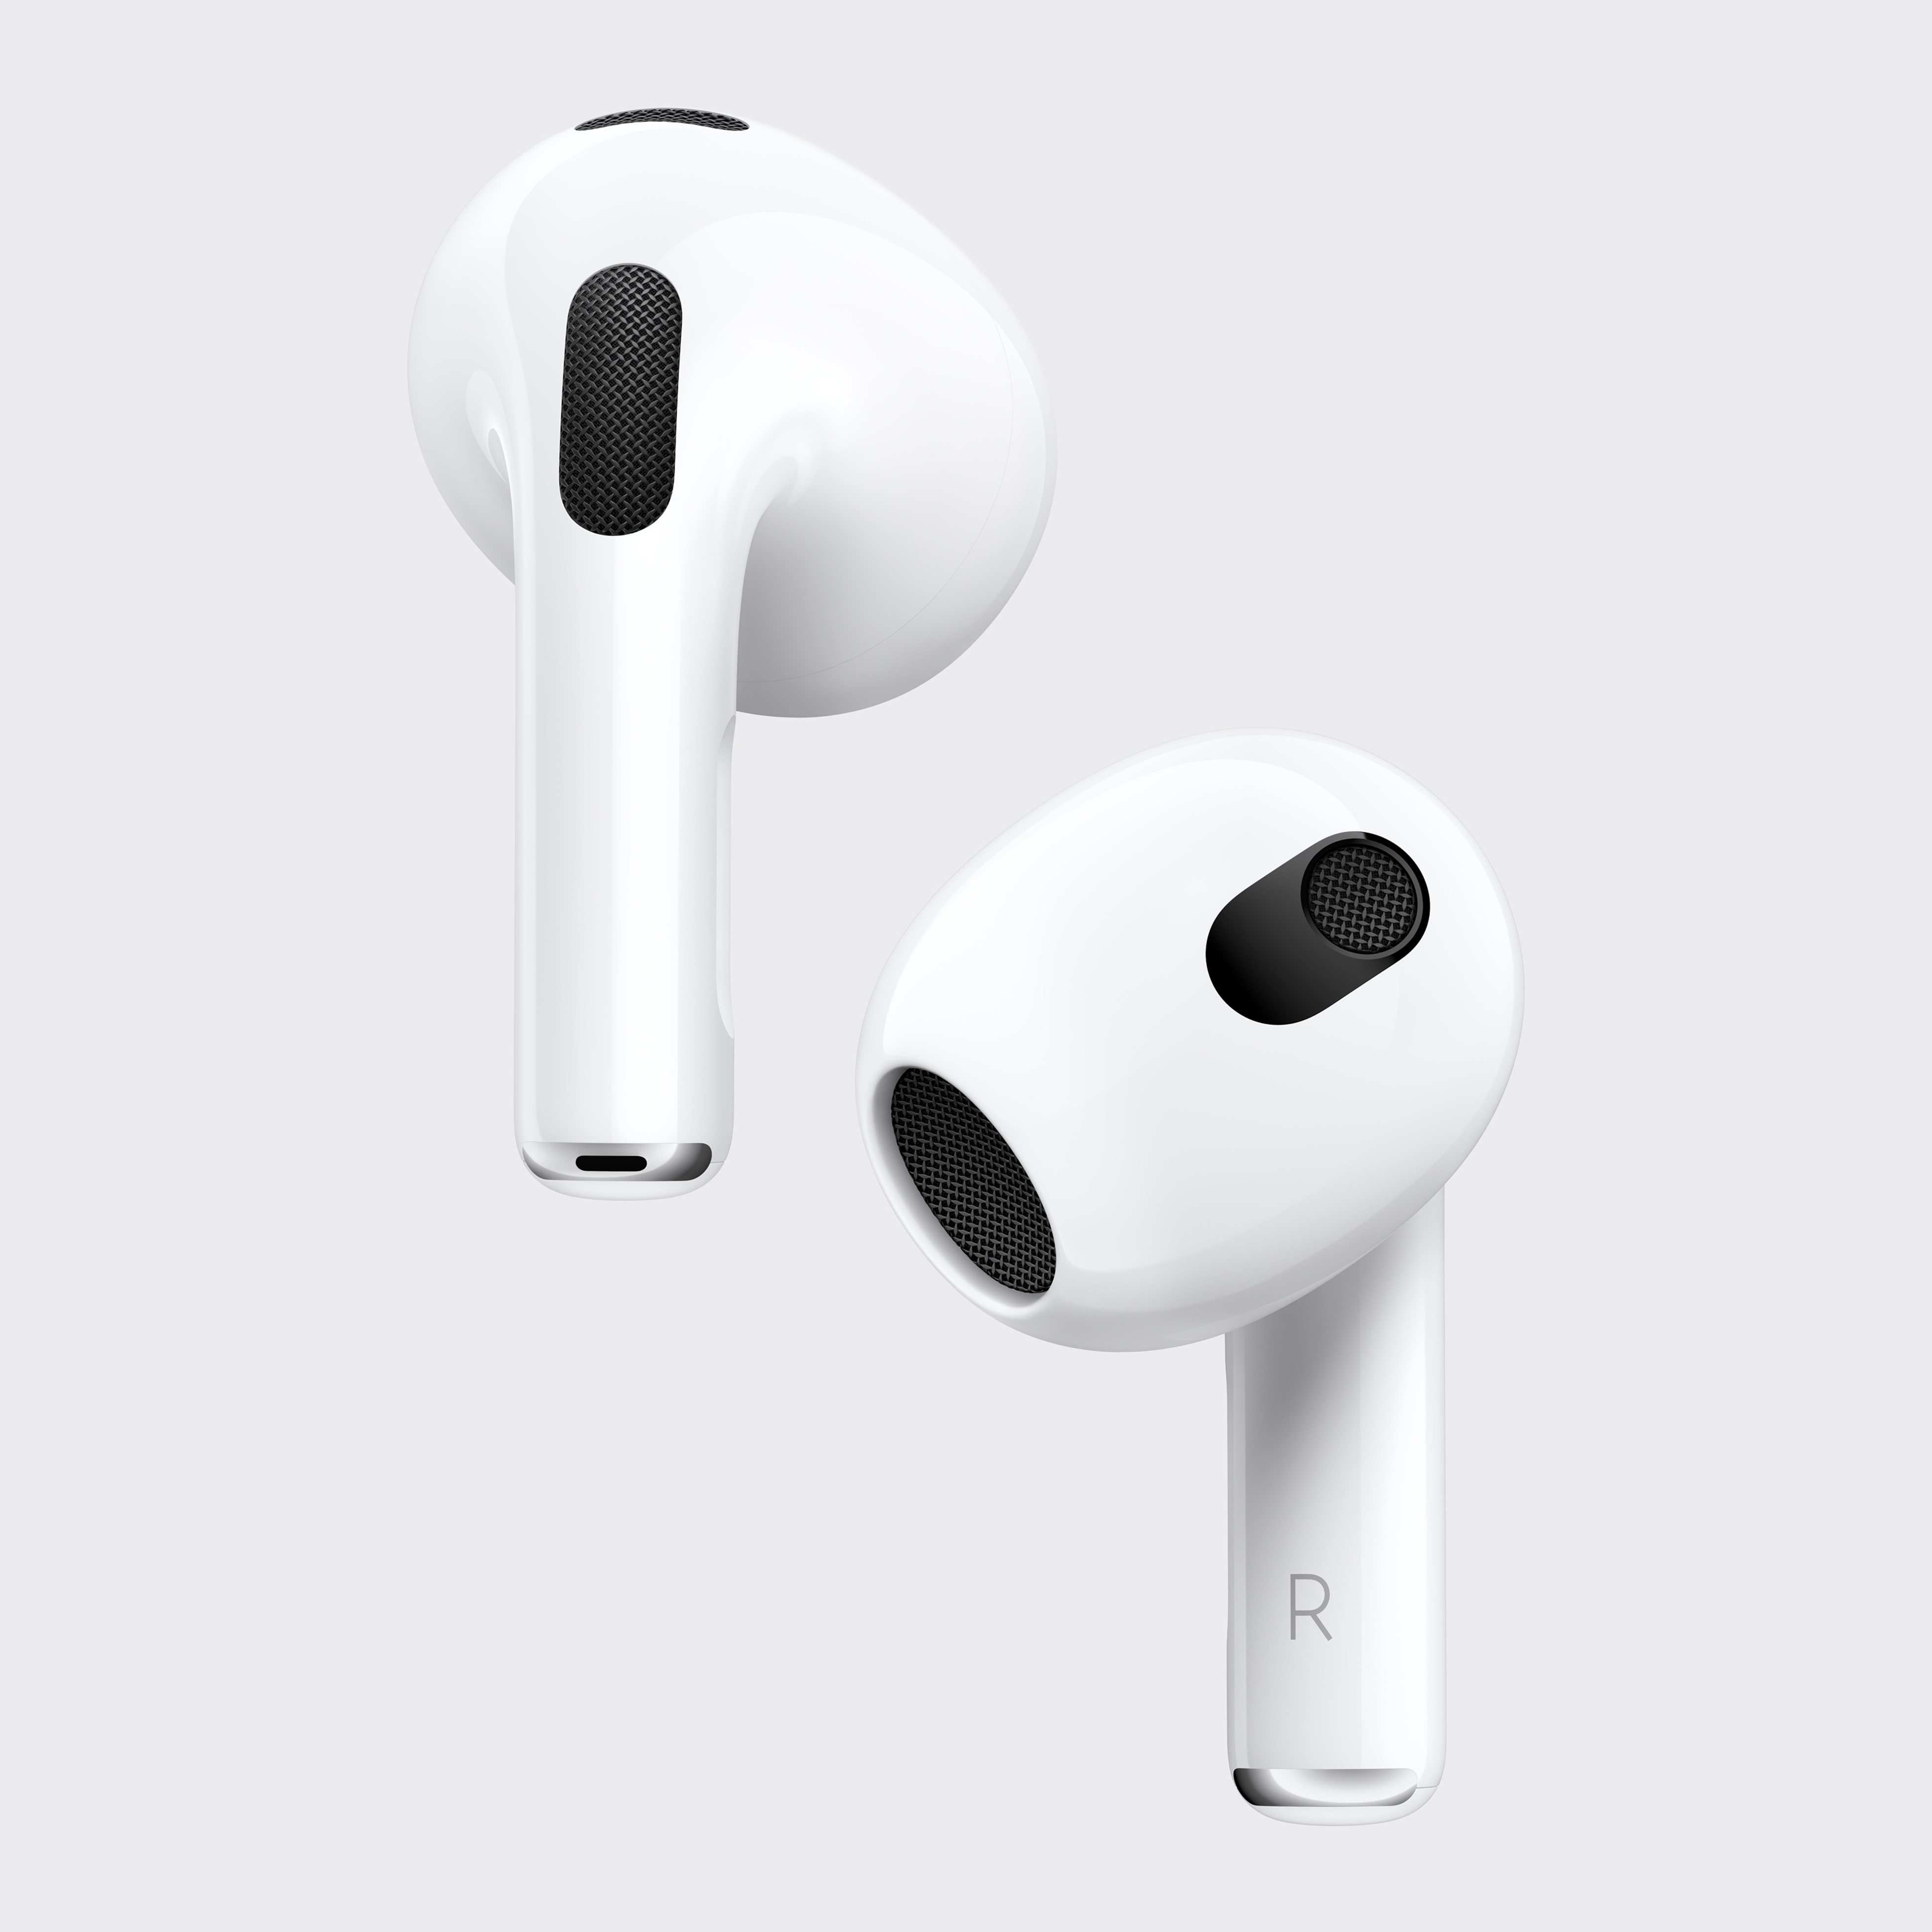 Mordrin Rekvisitter Sommetider Introducing the next generation of AirPods - Apple